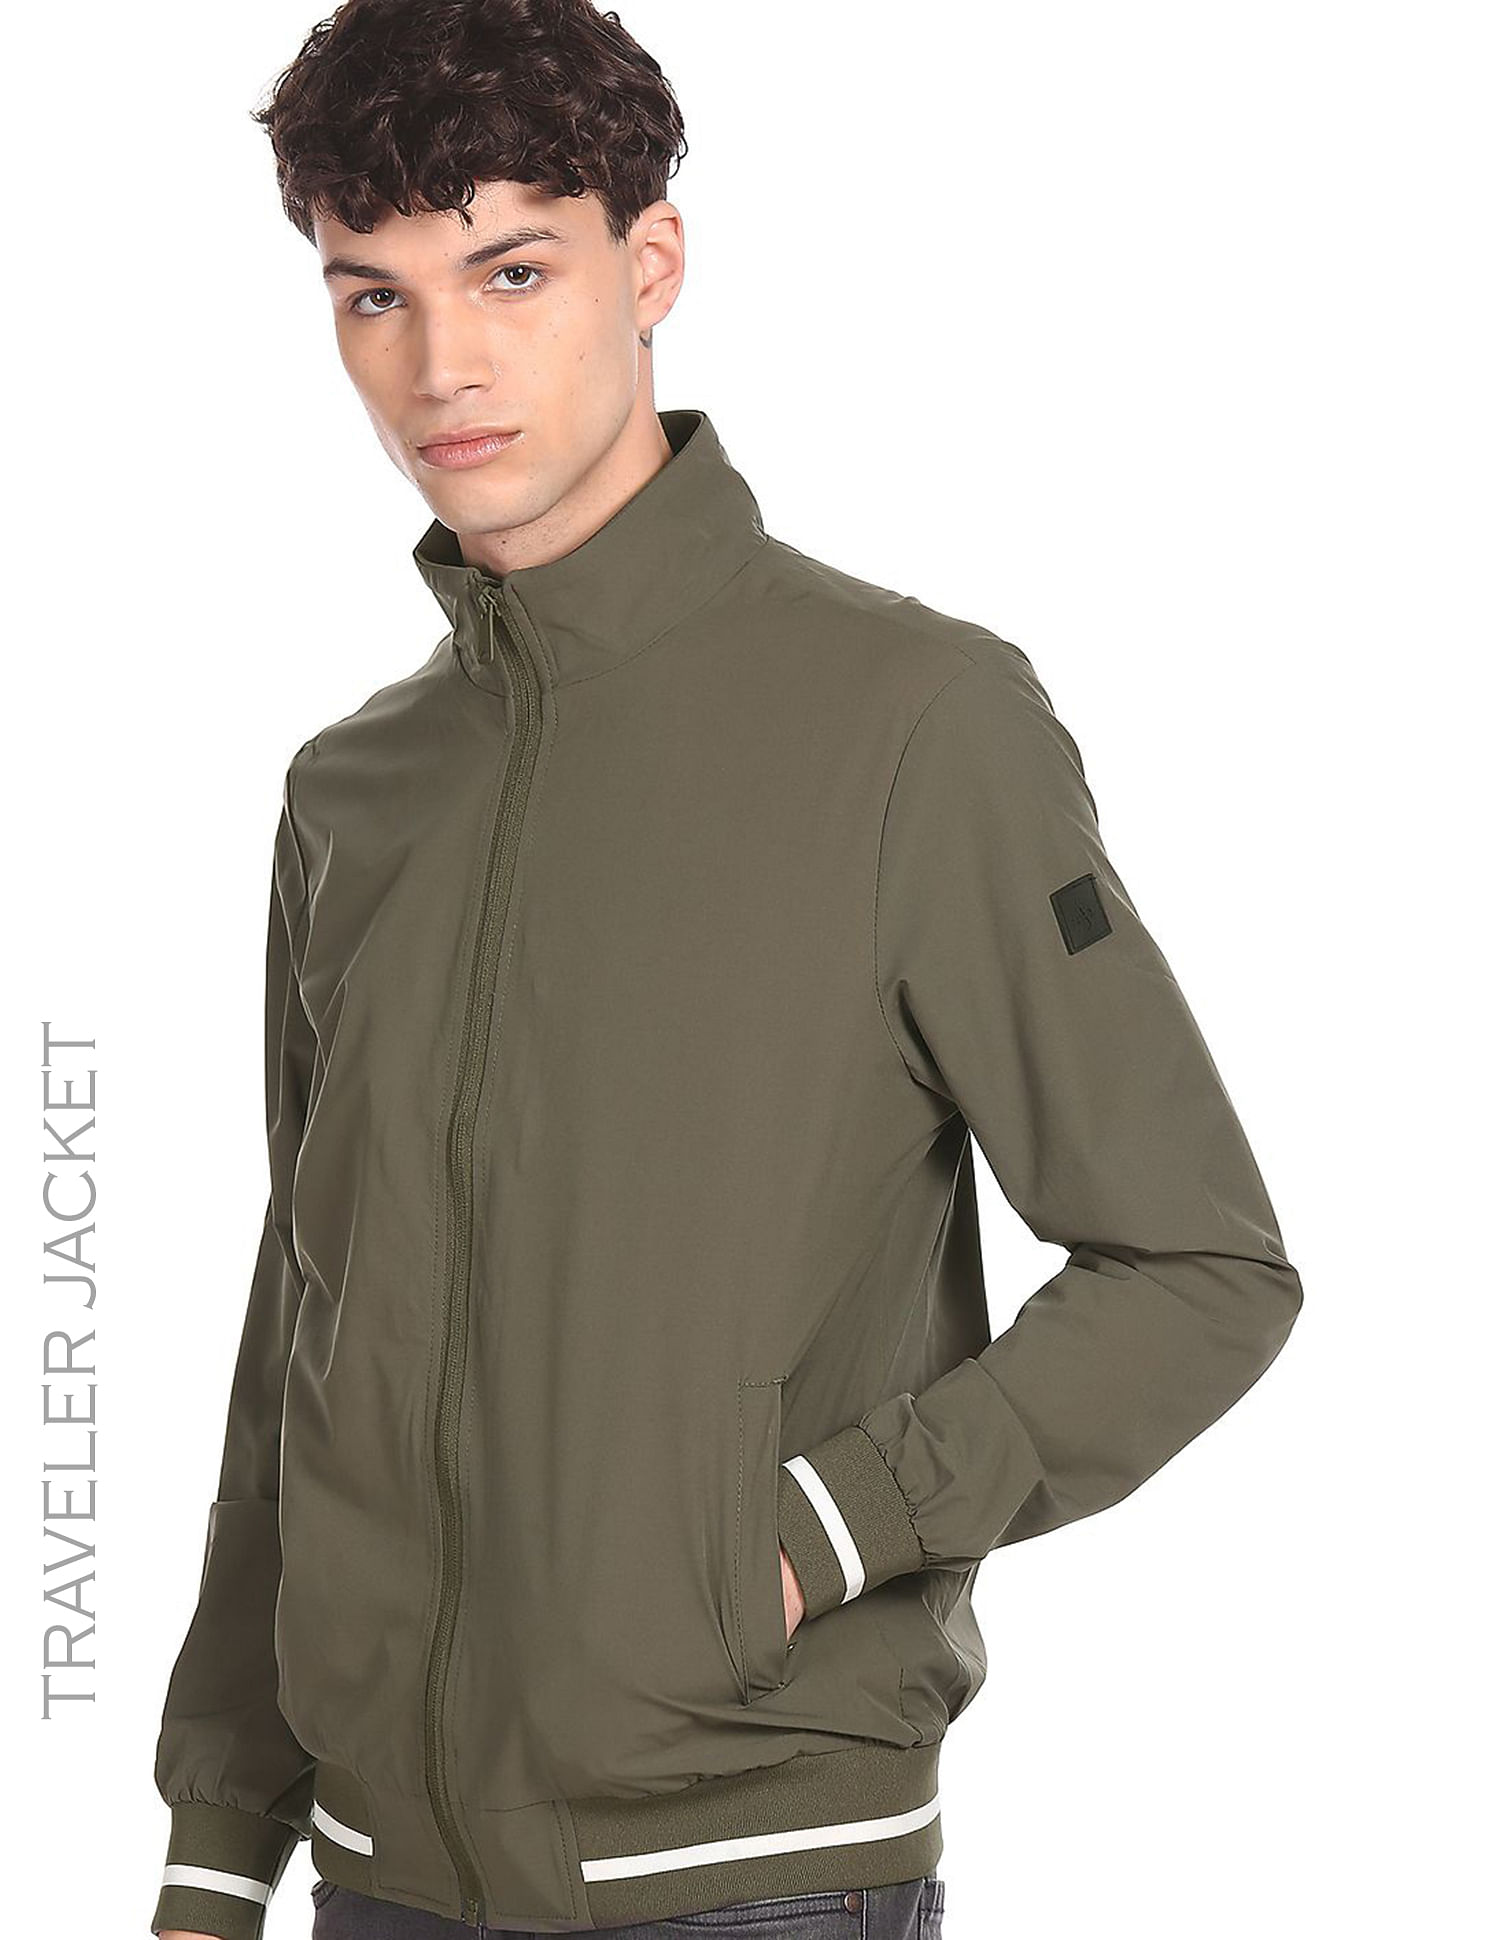 Buy Arrow Sports Stand Collar Zip Up Solid Jacket - NNNOW.com